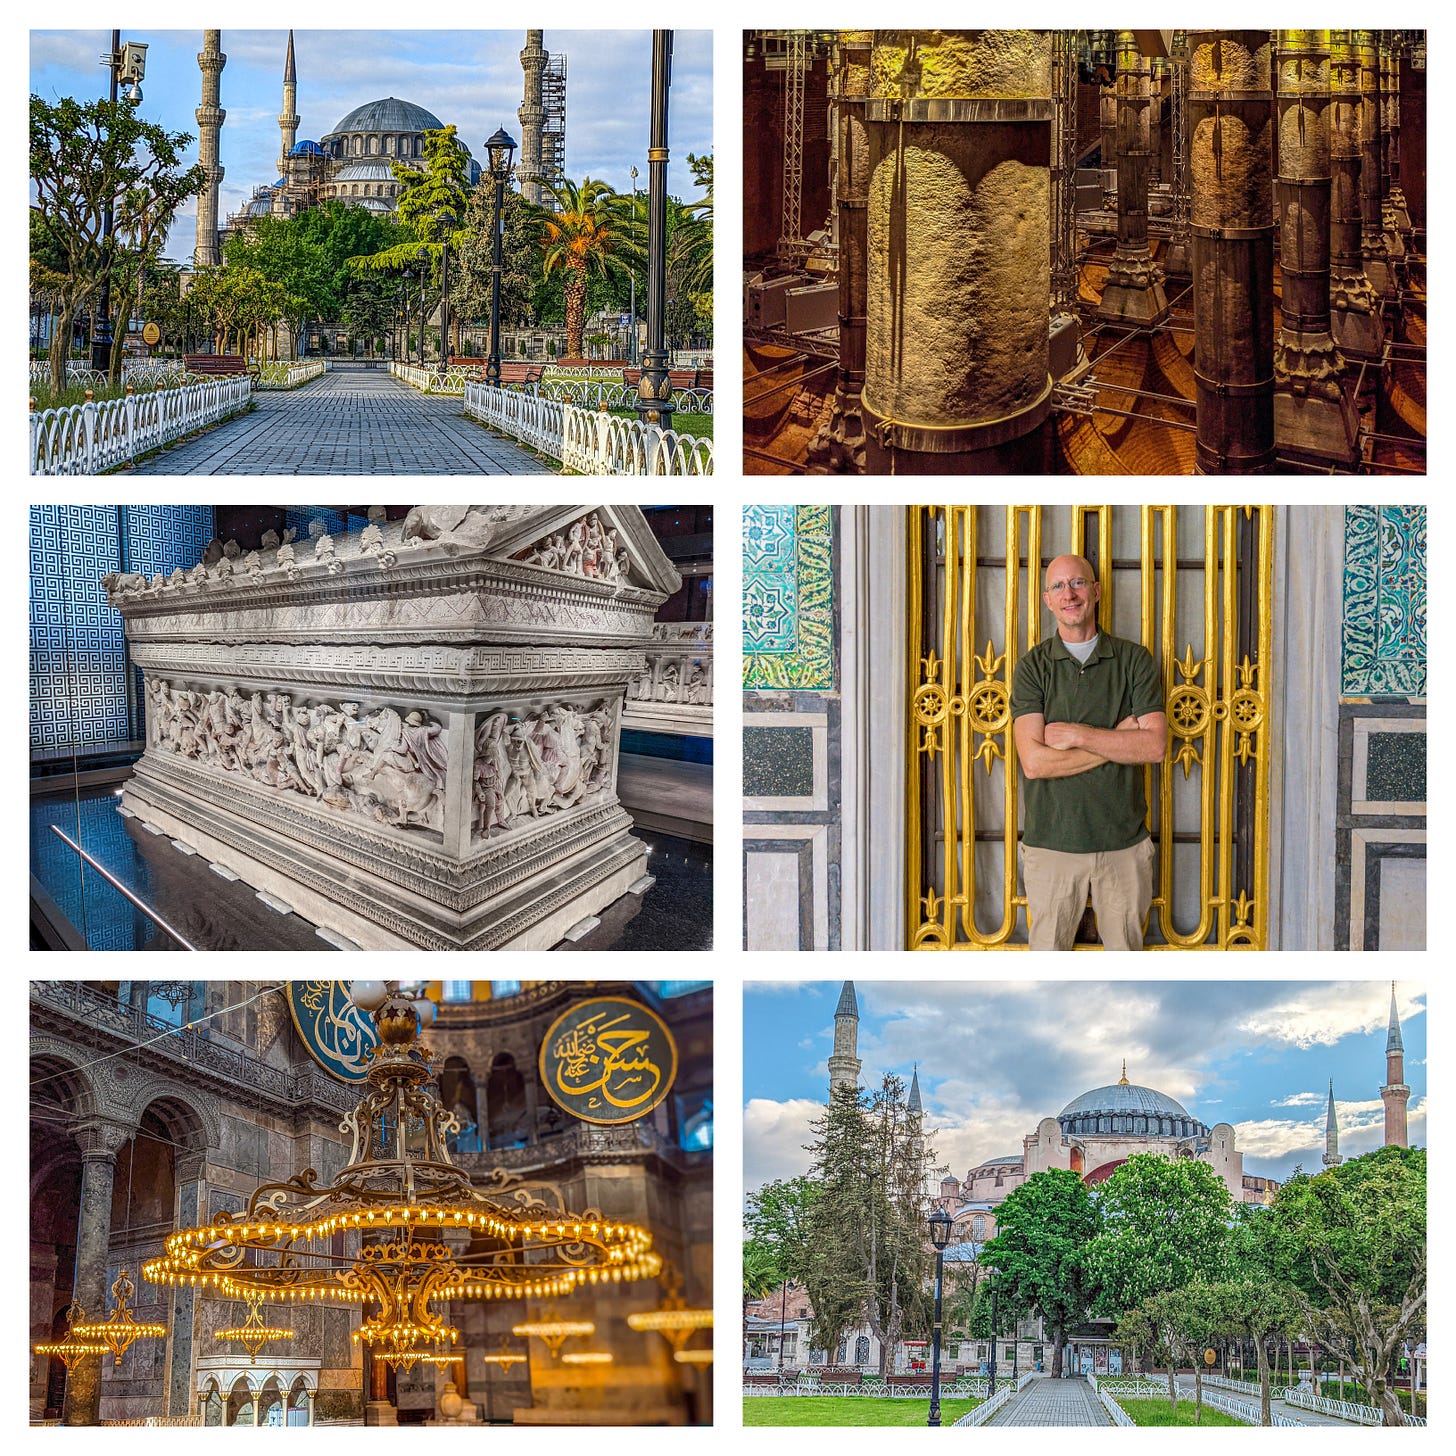 Six pictures showing the exterior of Hagia Sophia and the Blue Mosque and the support pillars of the Theodosious Cistern; Alexander's Sarcaphogus, and Brent in Topkapi Palace